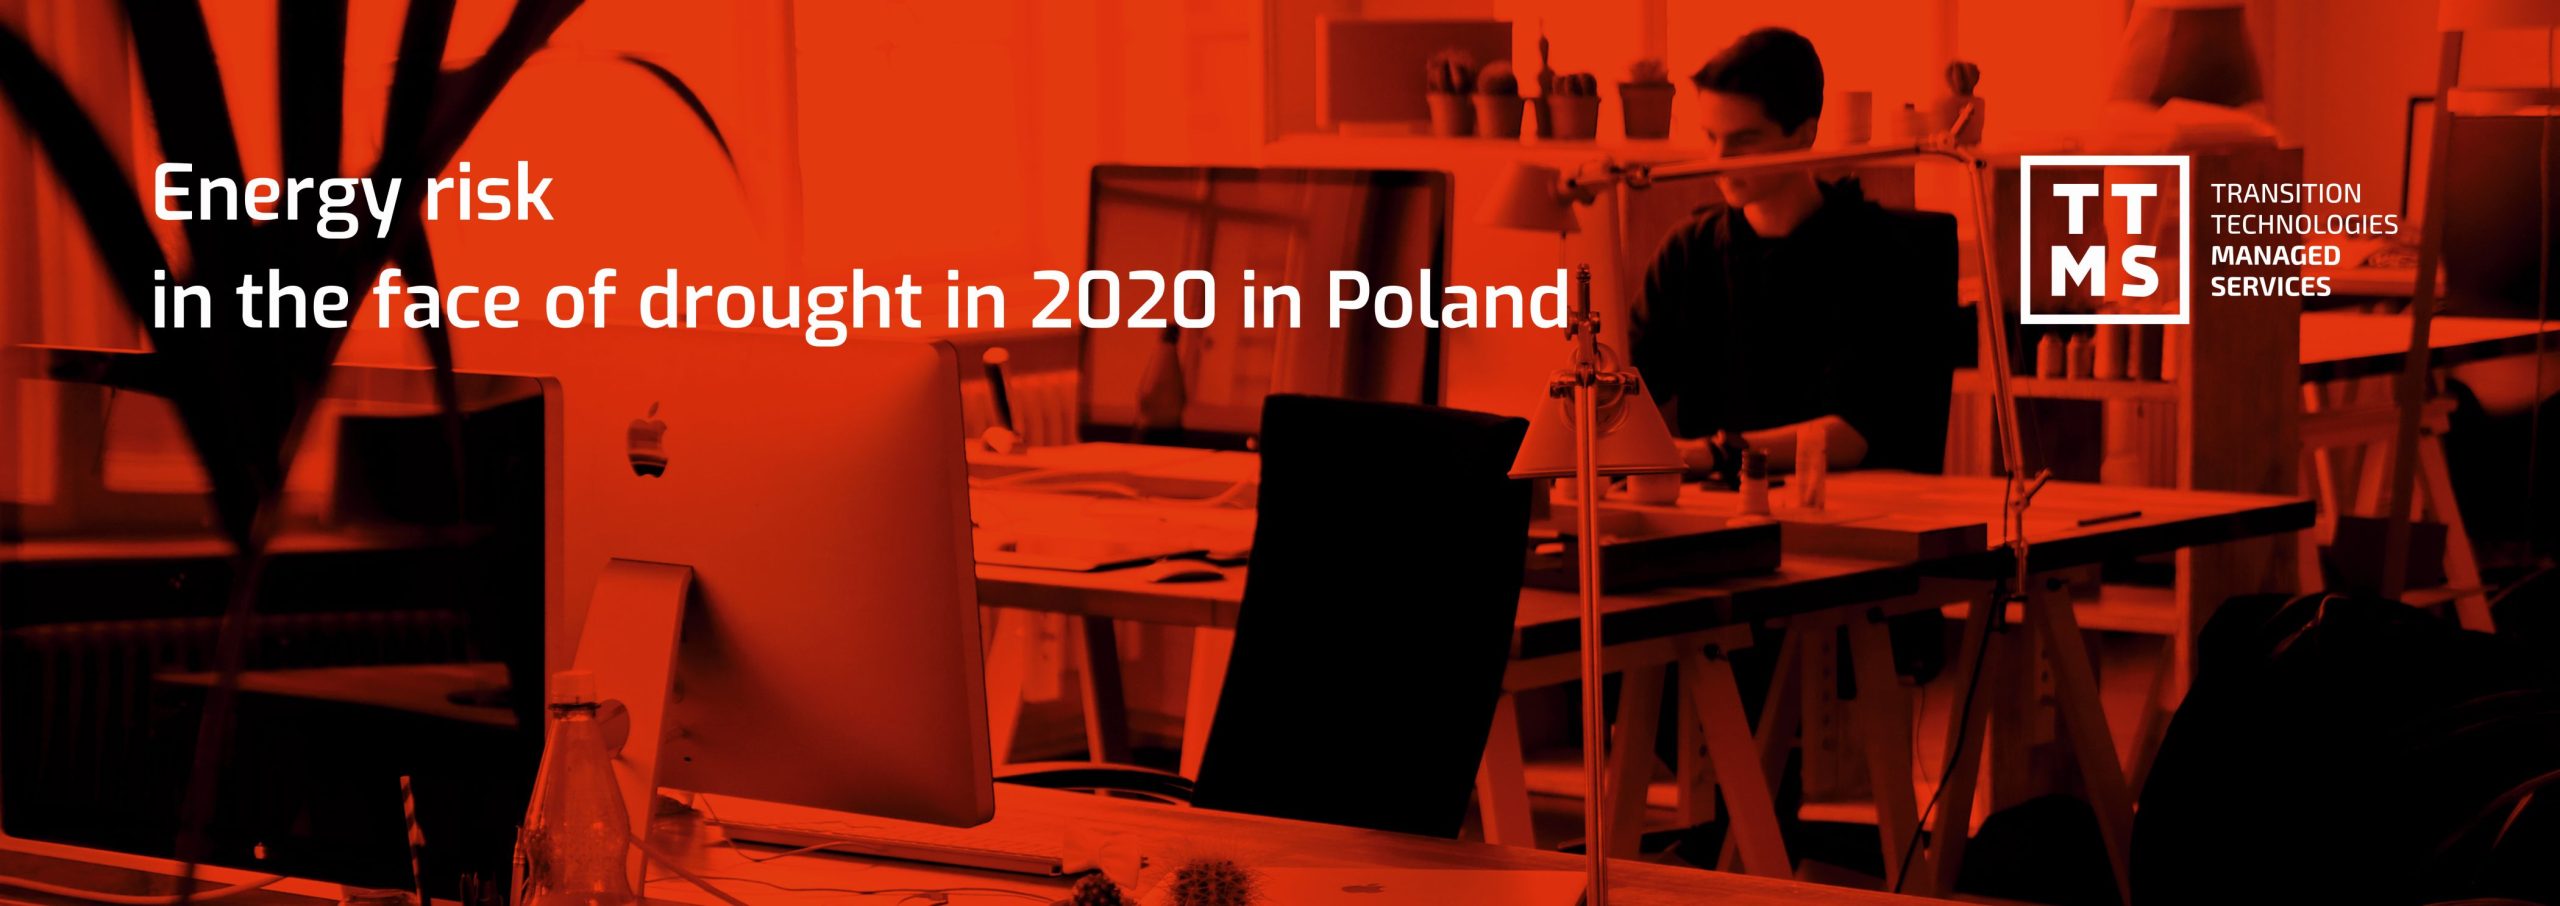 Energy risks in the face of drought in 2020 in Poland